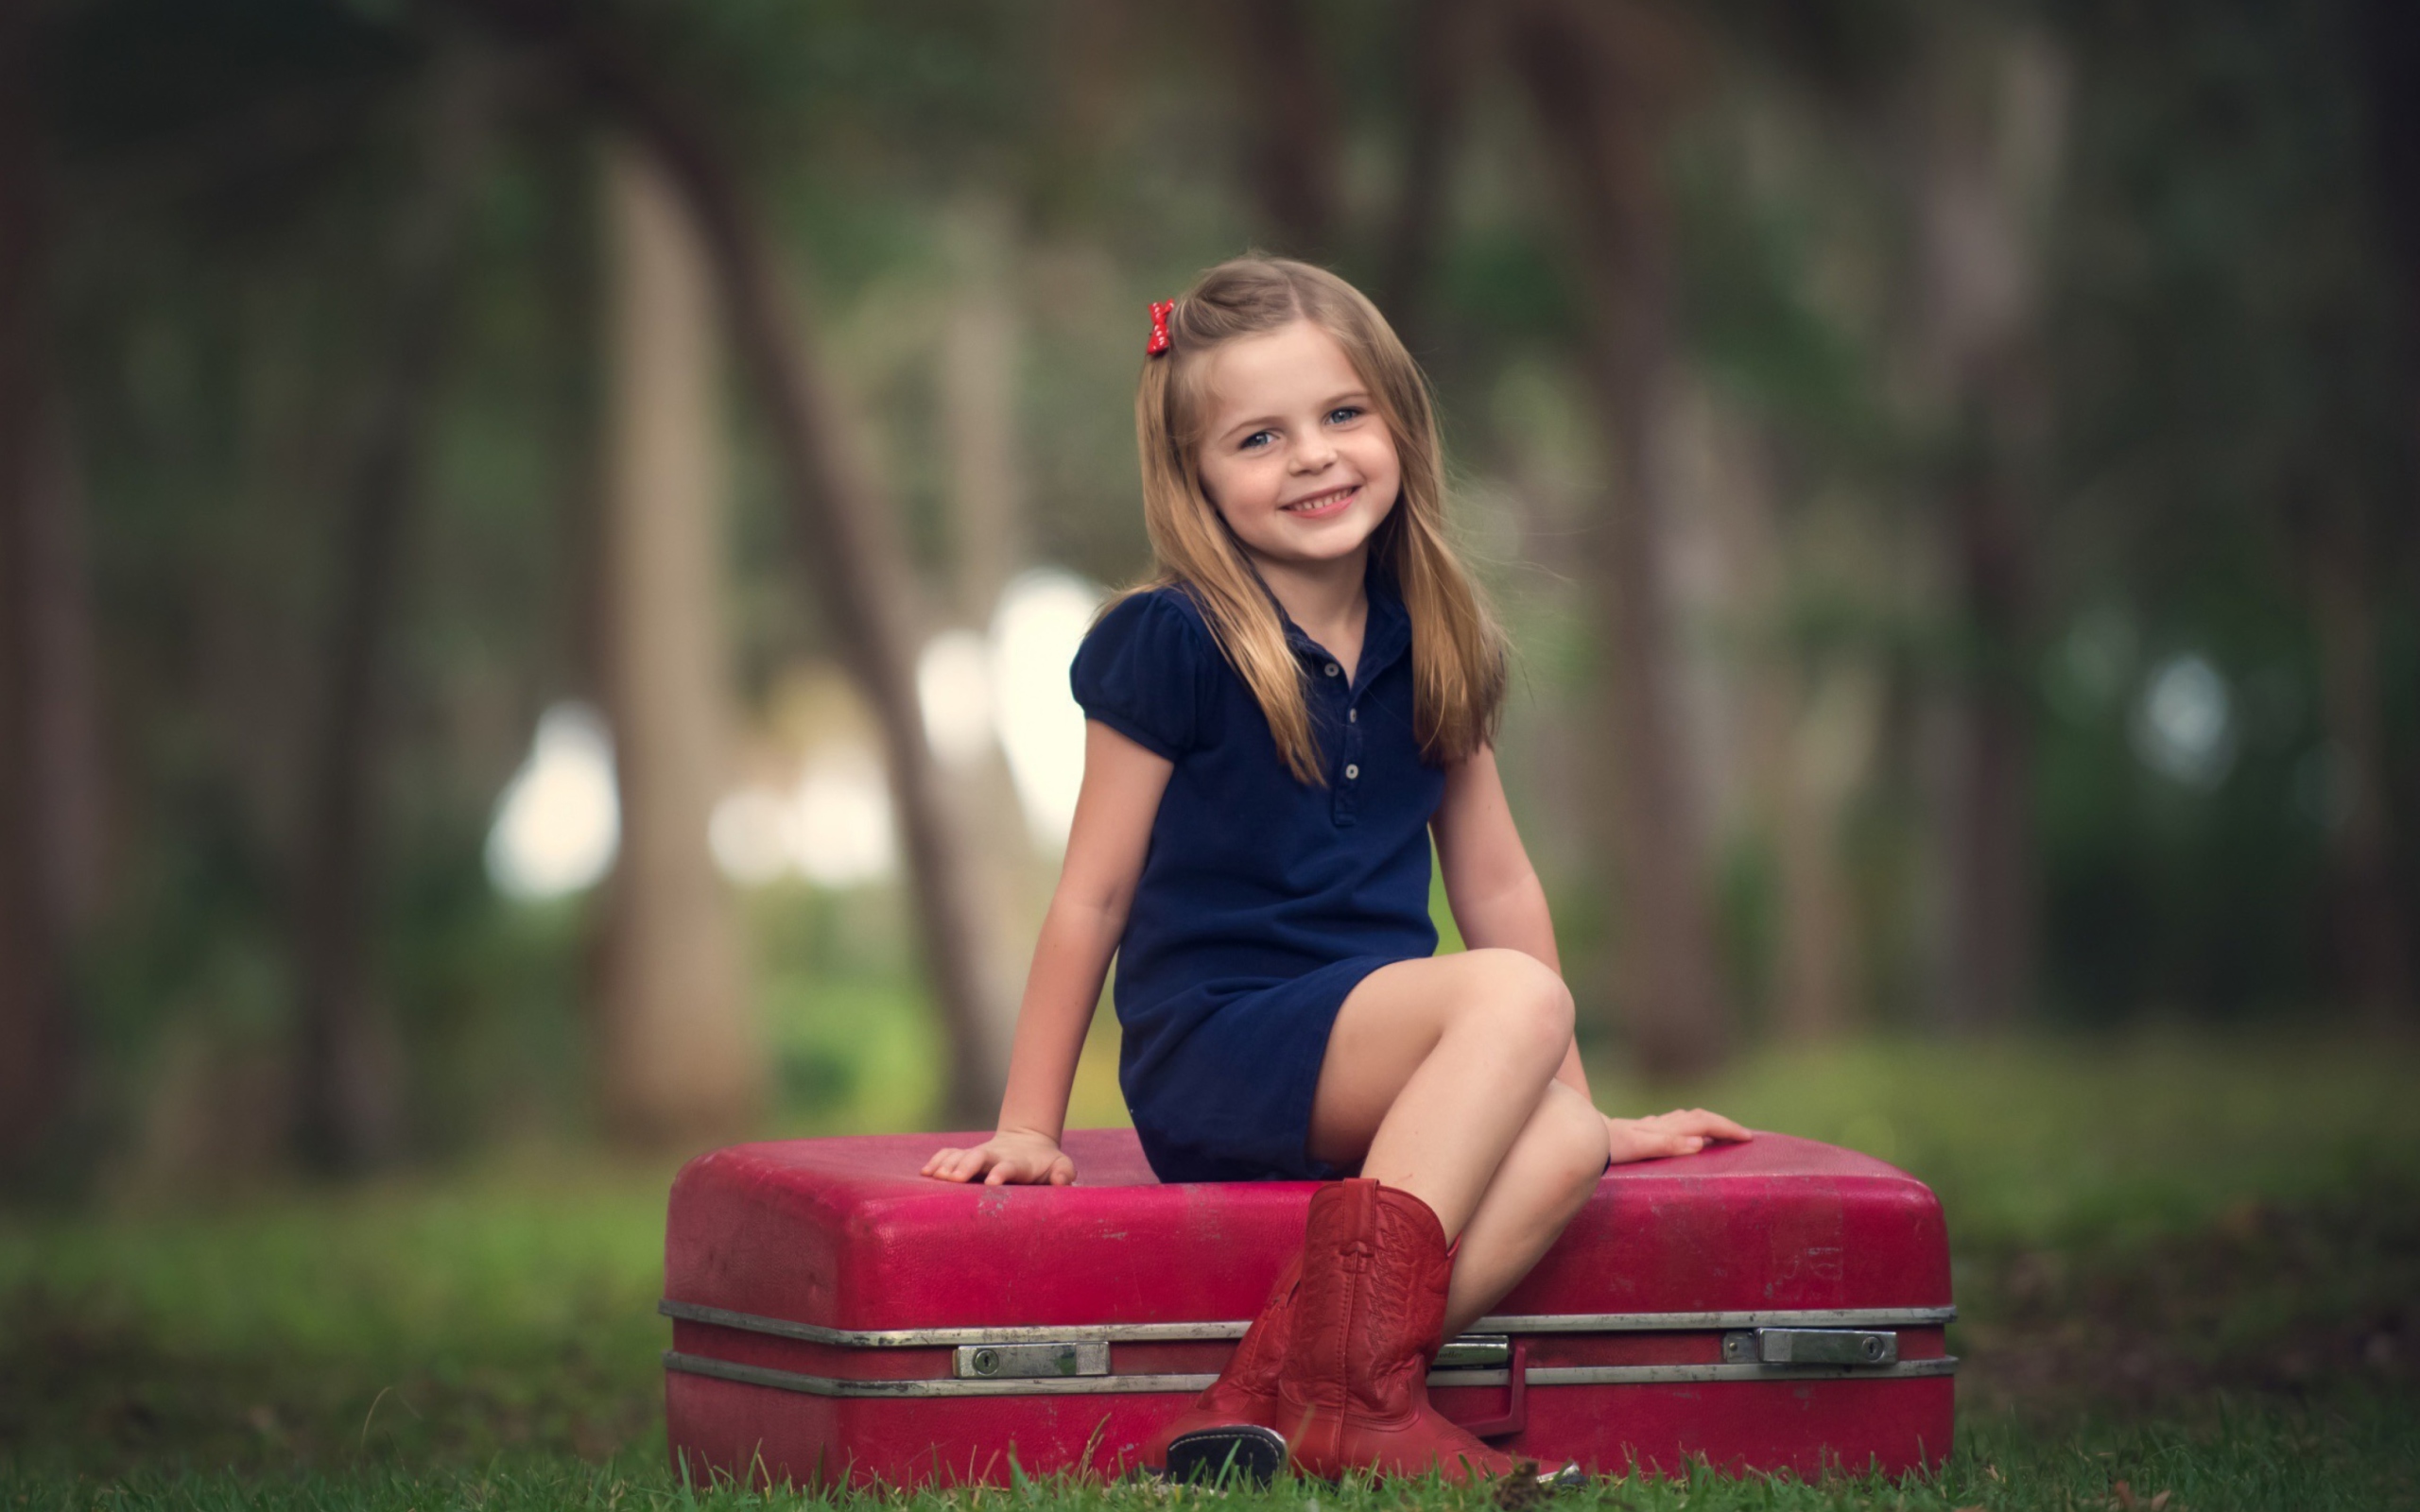 Little Girl Sitting On Red Suitcase screenshot #1 2560x1600